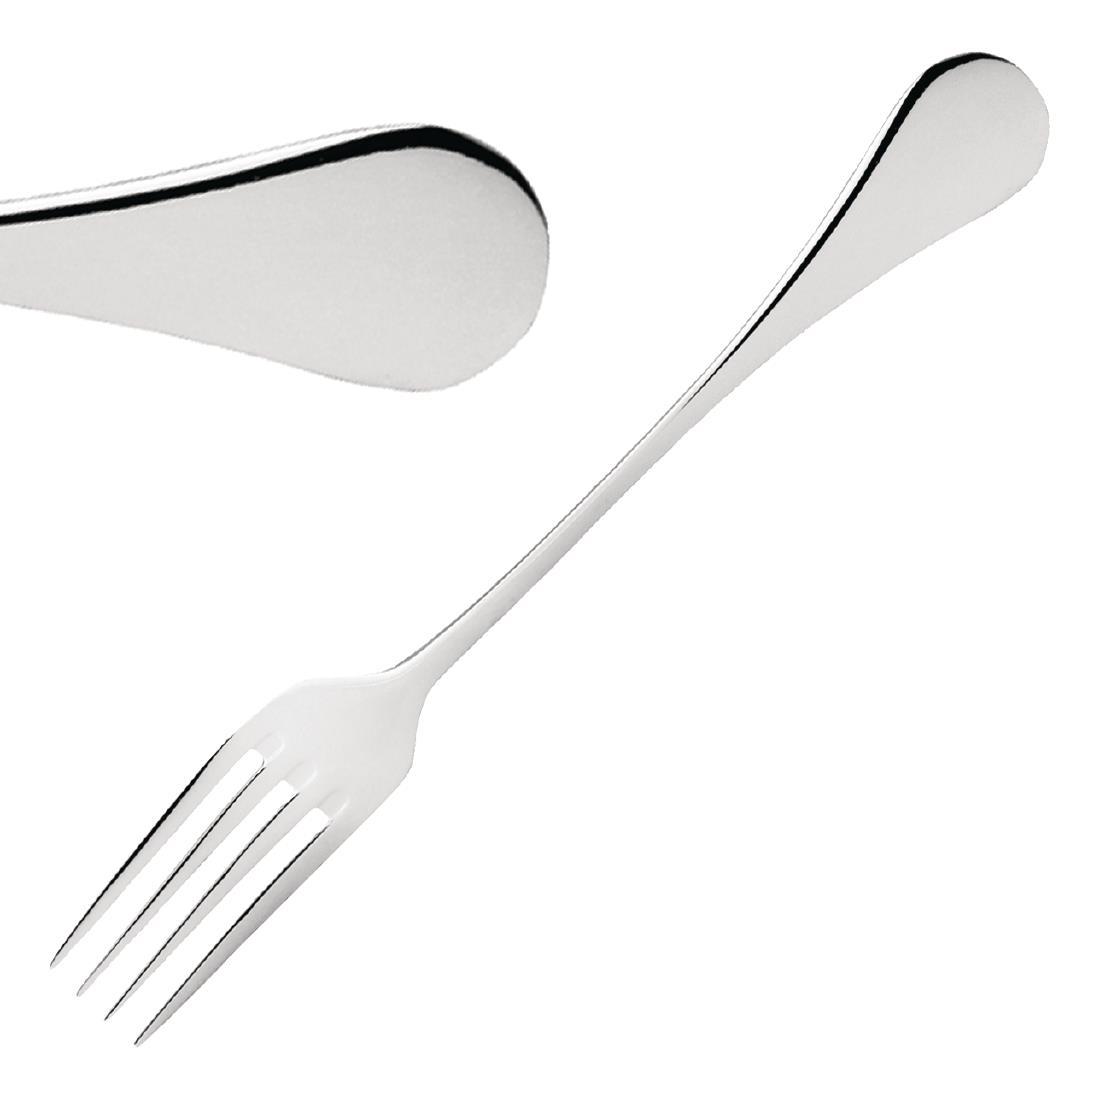 Olympia Paganini Table fork (Pack of 12) - GM453  - 1